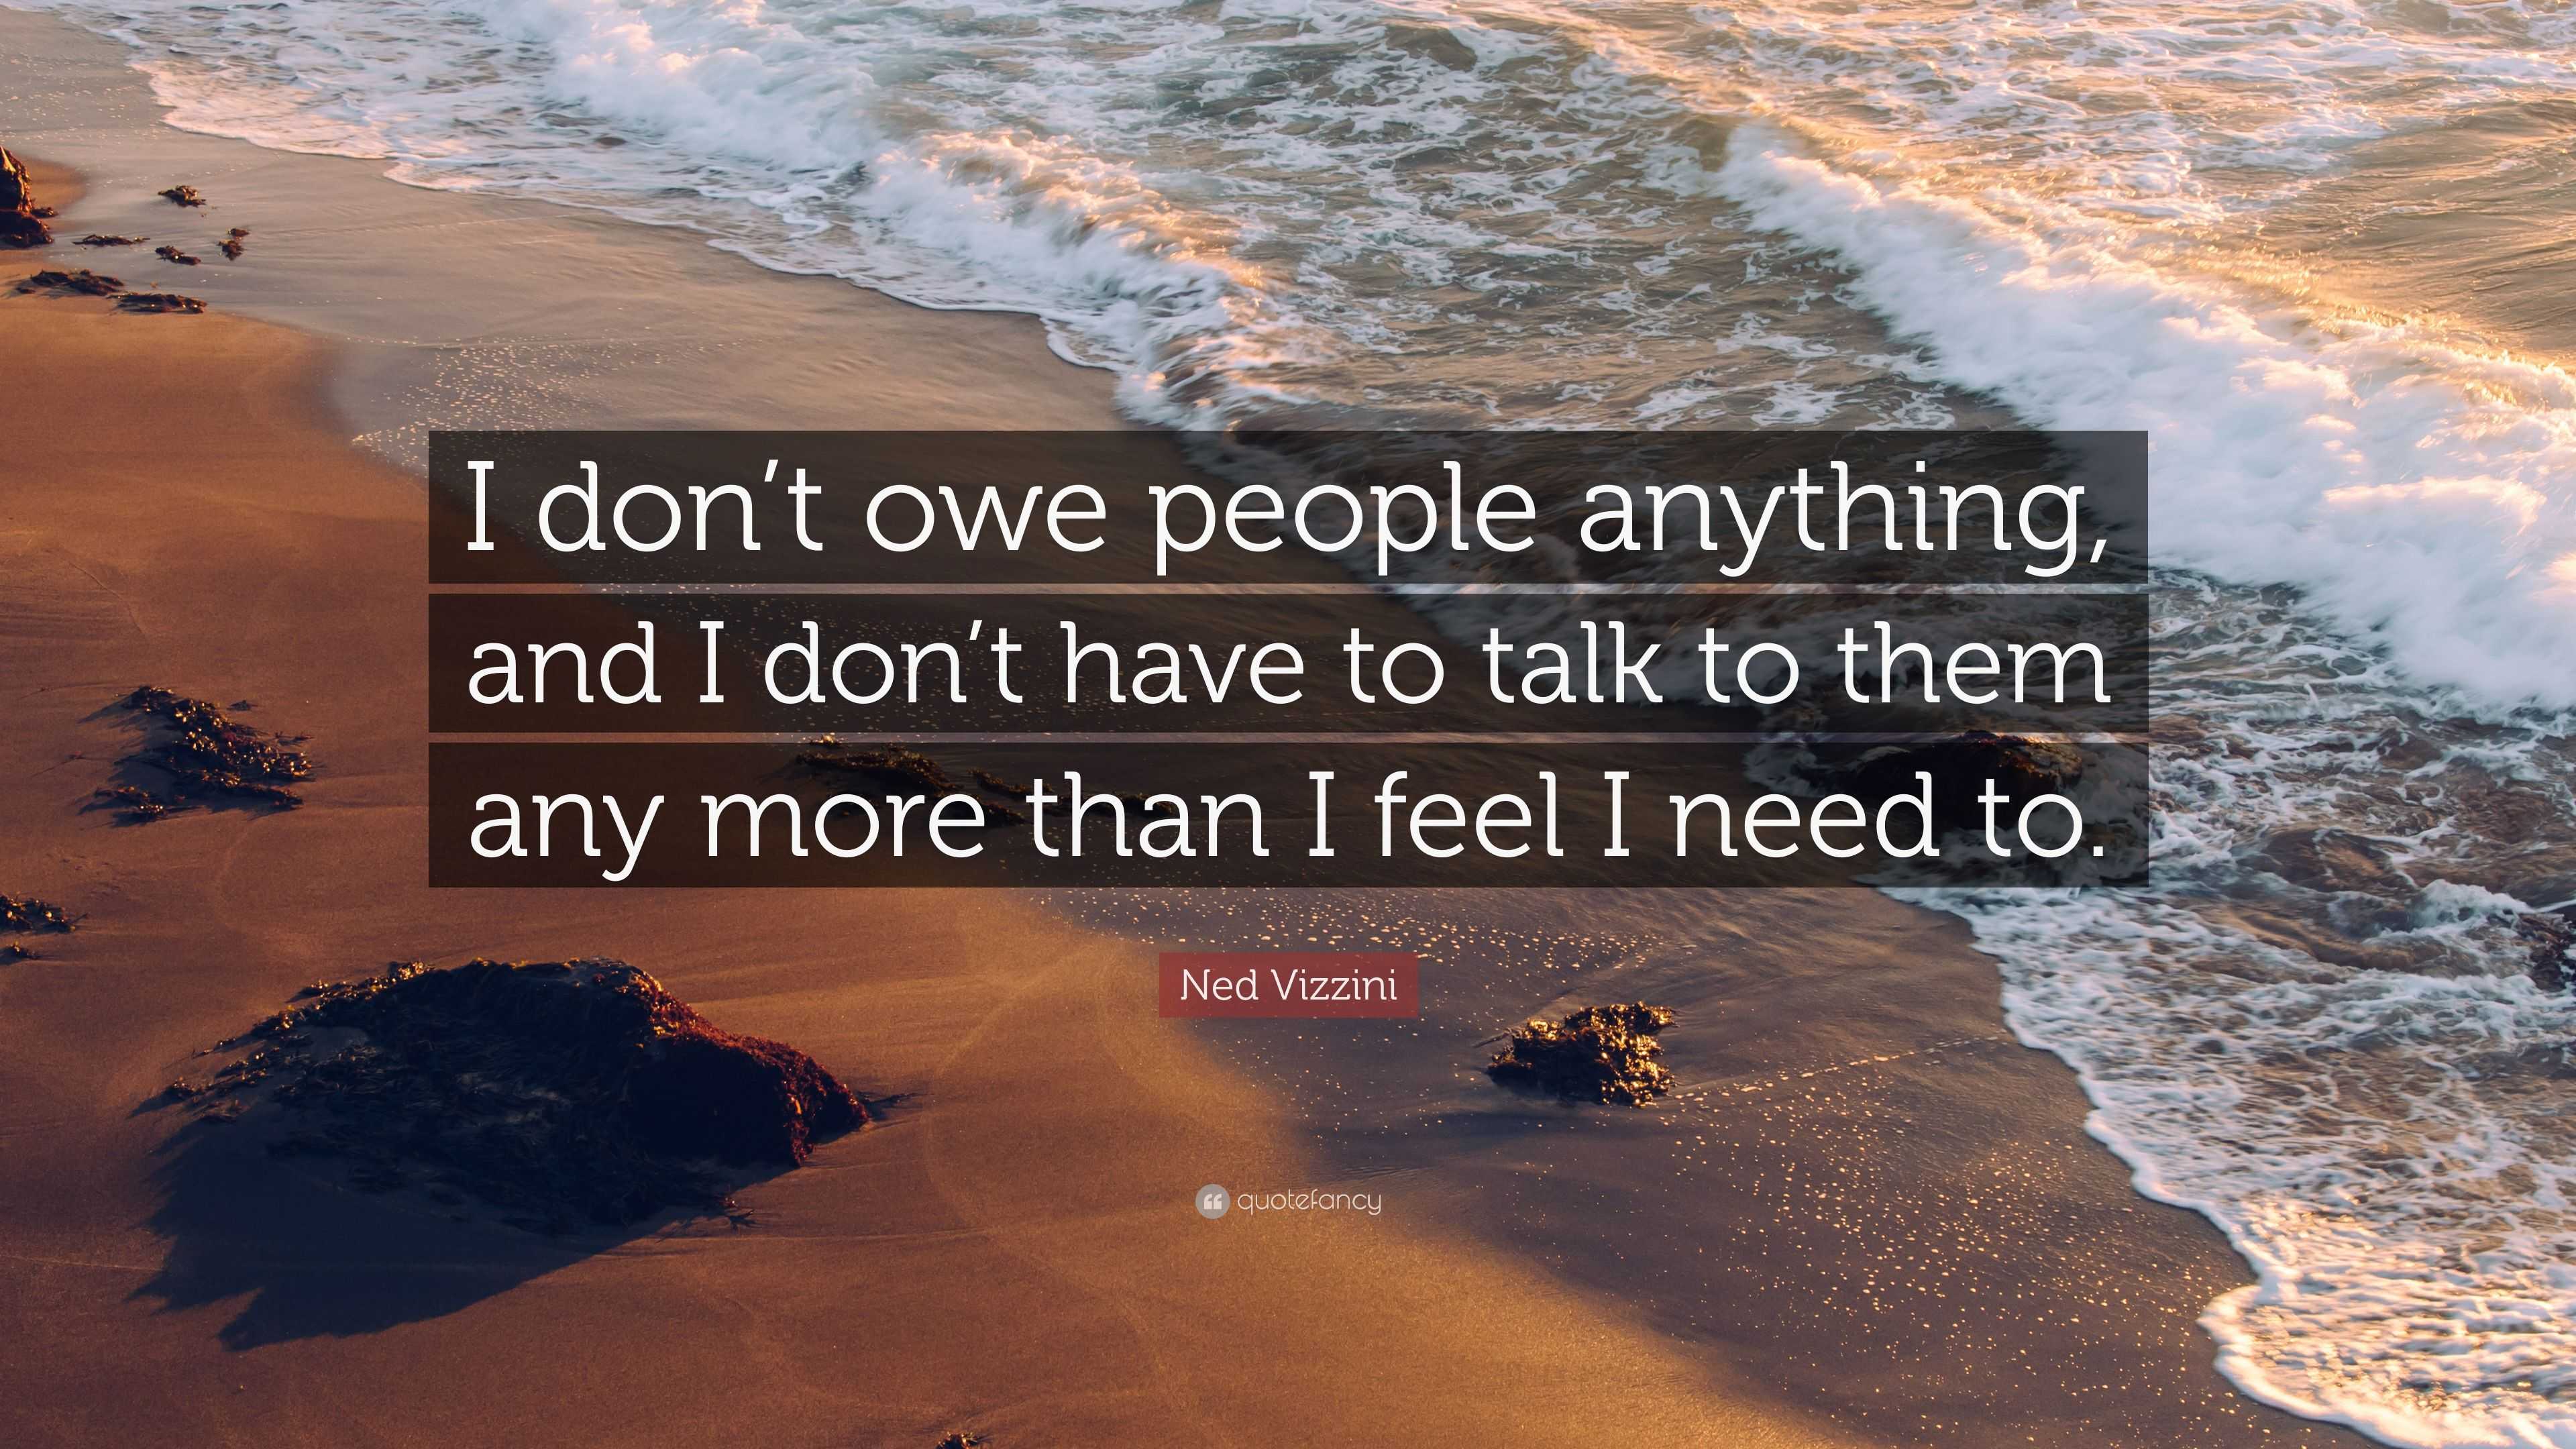 Ned Vizzini Quote: “I don’t owe people anything, and I don’t have to ...